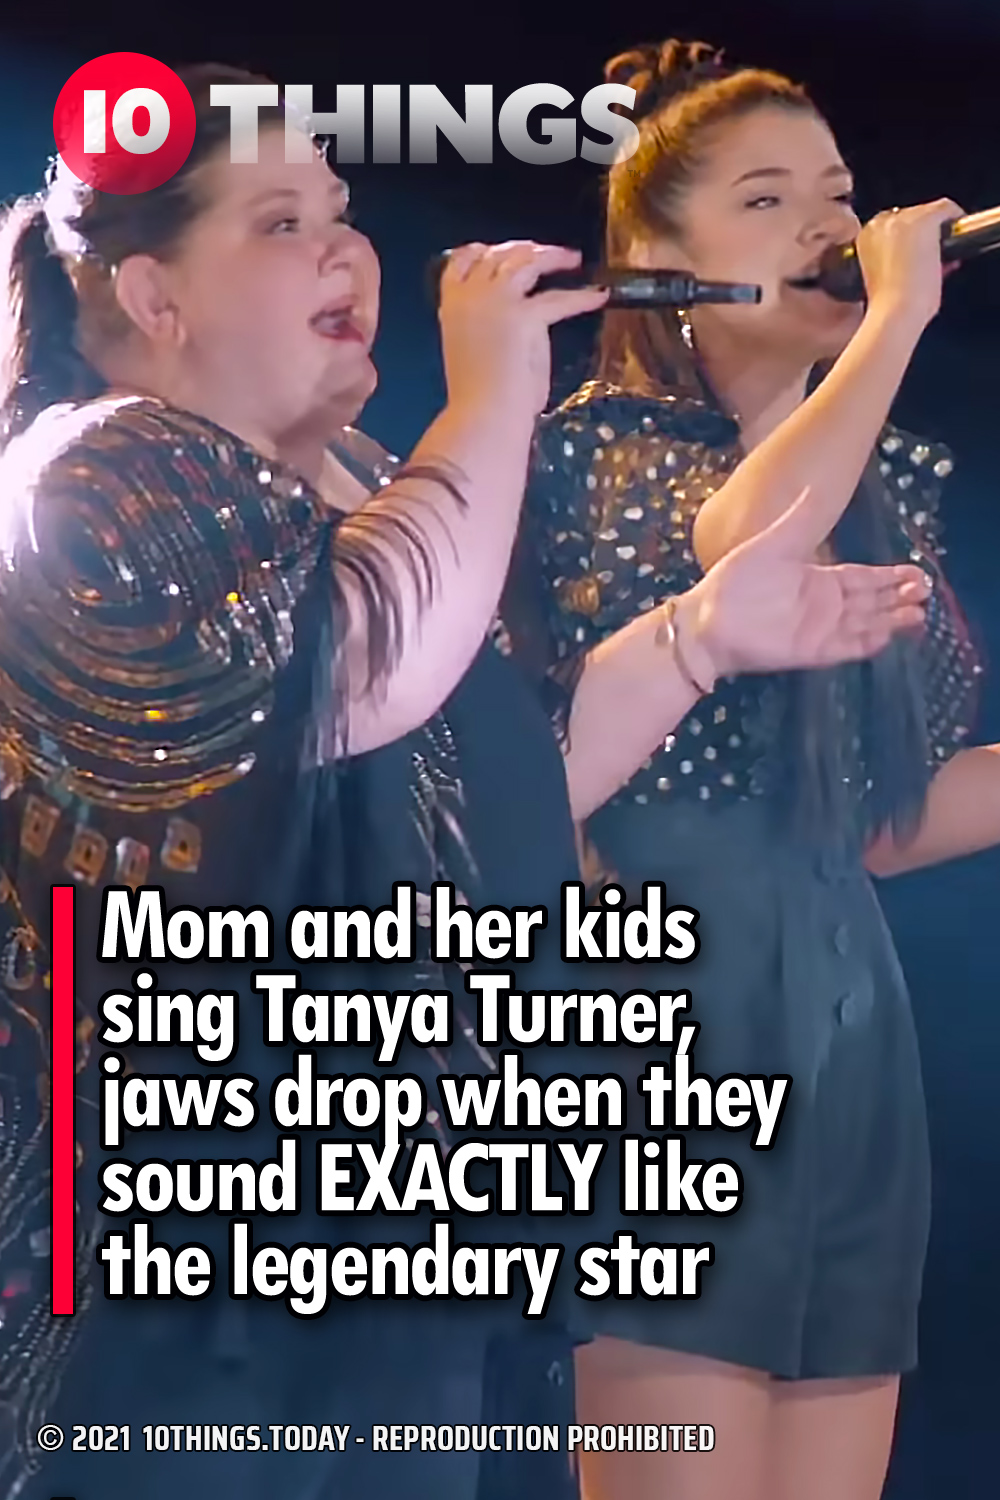 Mom and her kids sing Tanya Turner, jaws drop when they sound EXACTLY like the legendary star